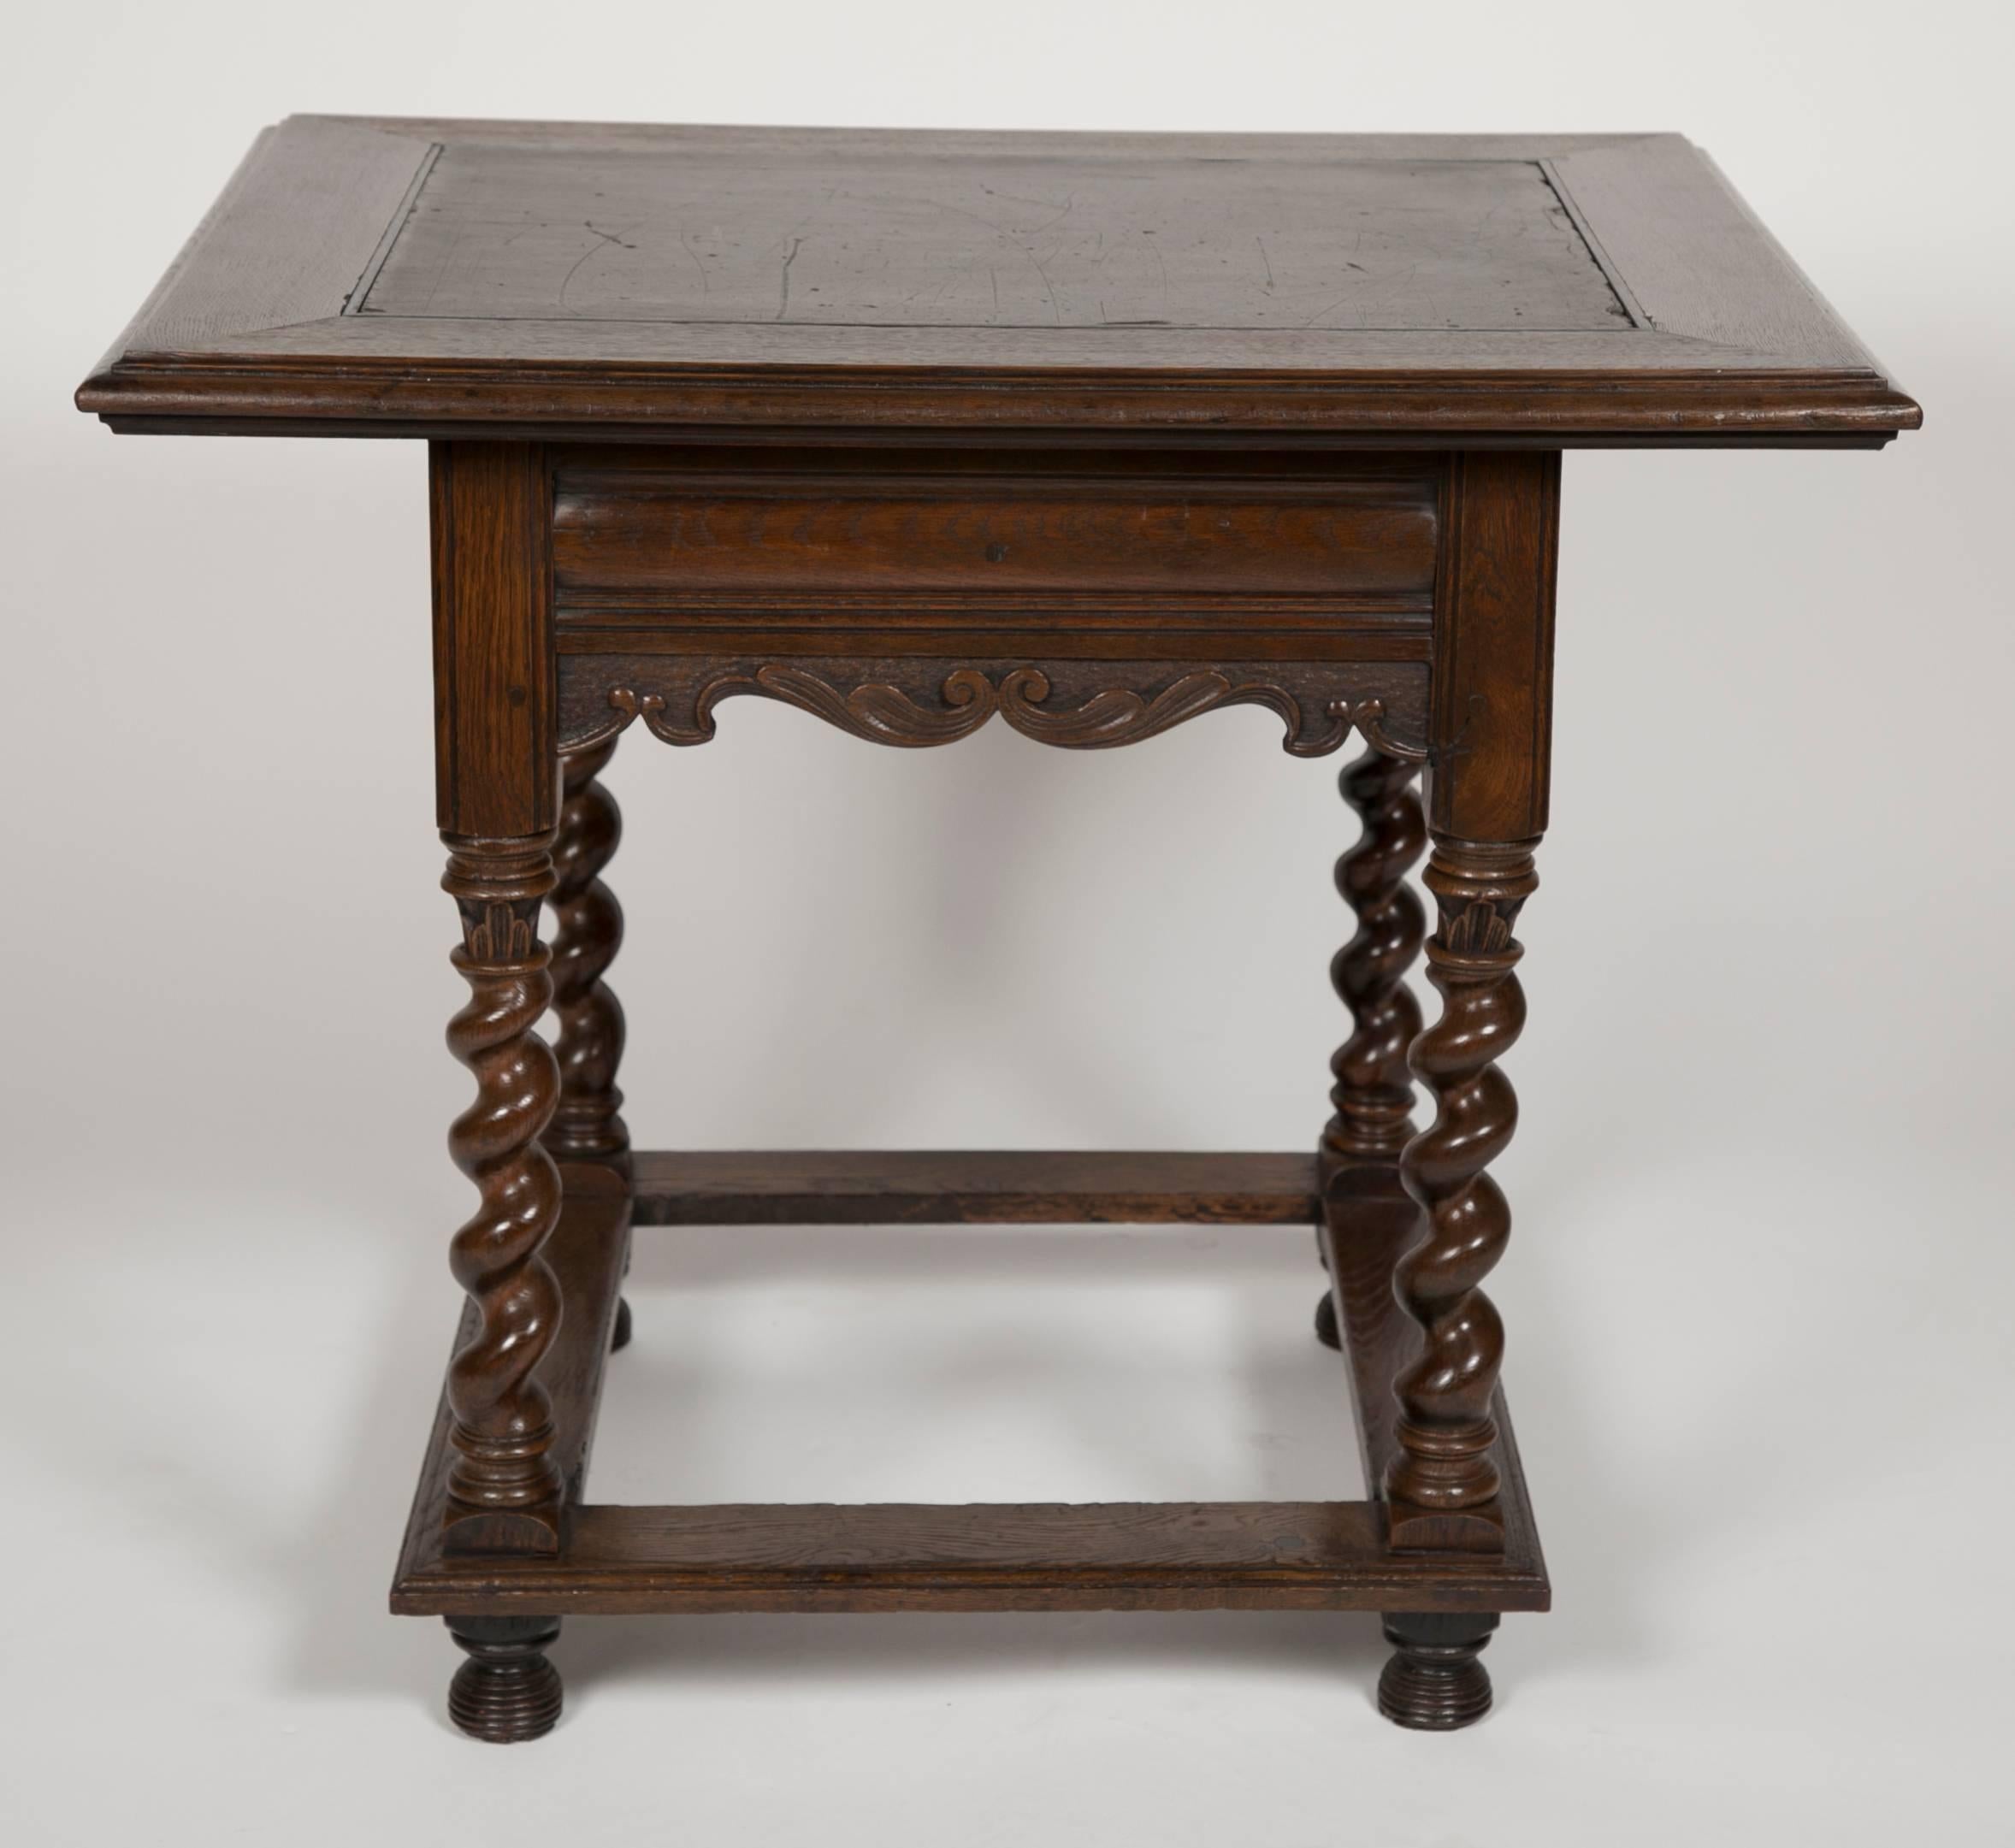 Hand-Carved Dutch Baroque Oak Center Table with Inlaid Slate Top